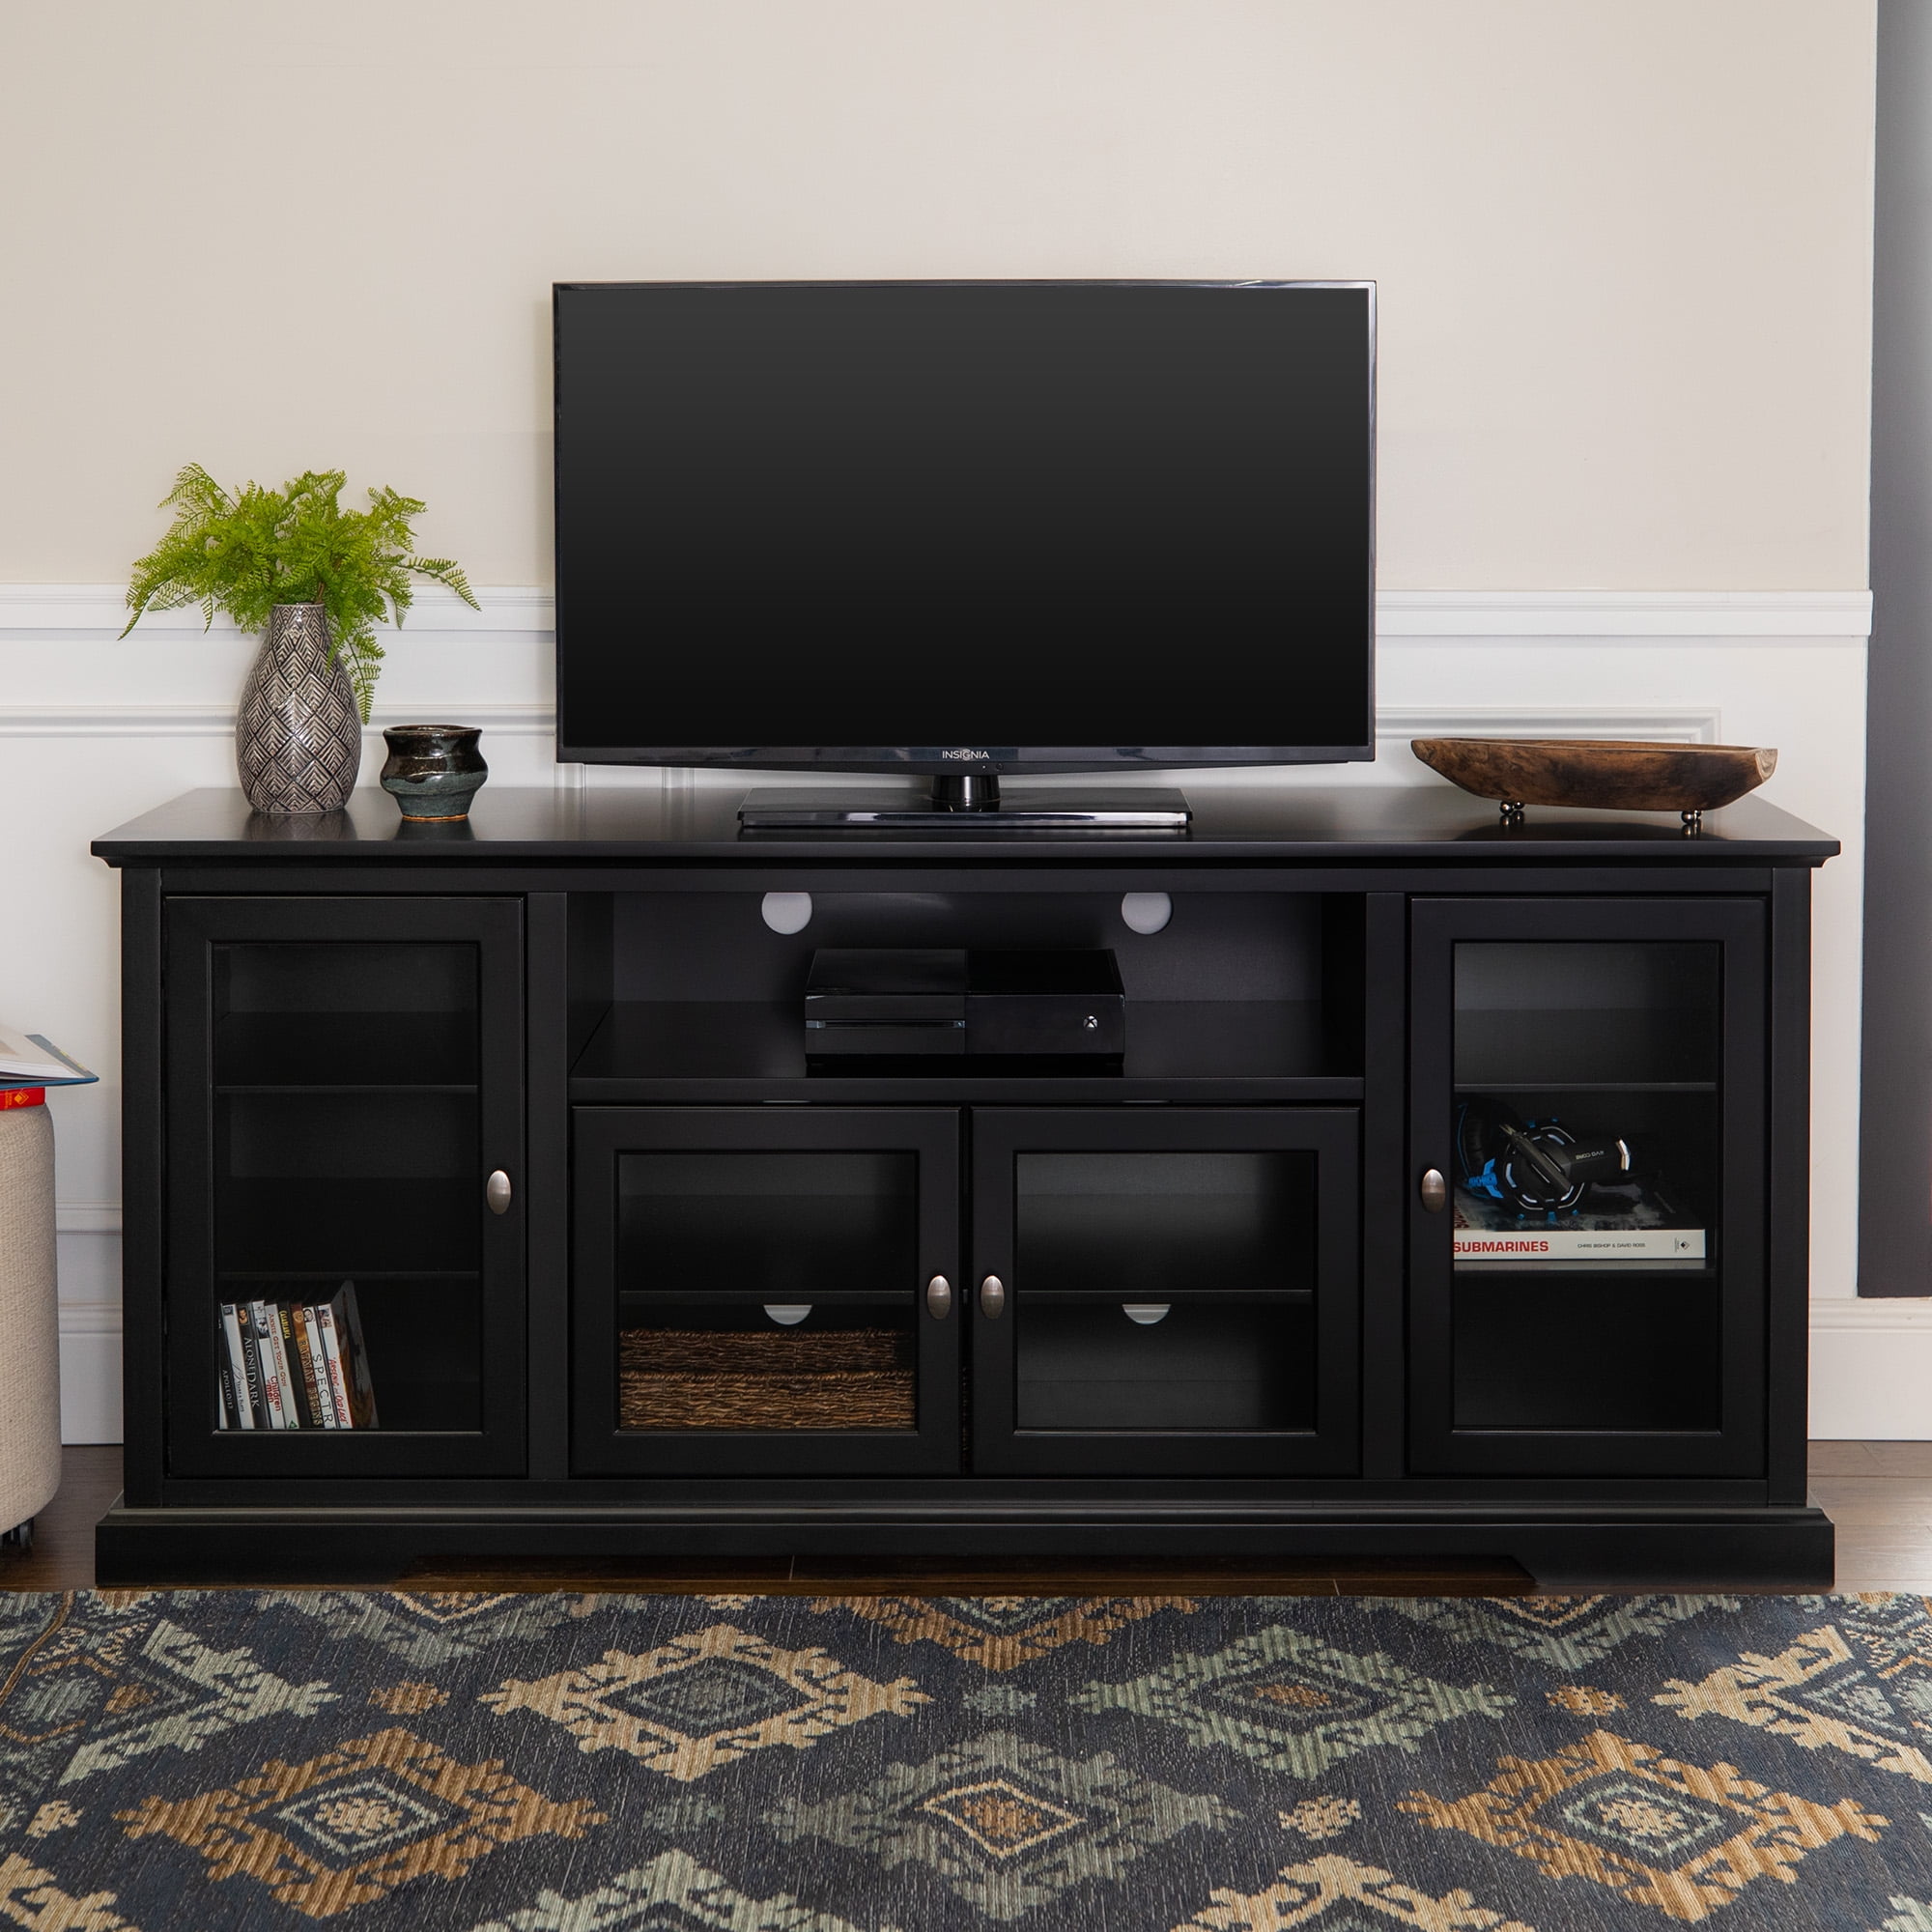 Manor Park Contemporary Tall TV Stand for TVs up to 78 